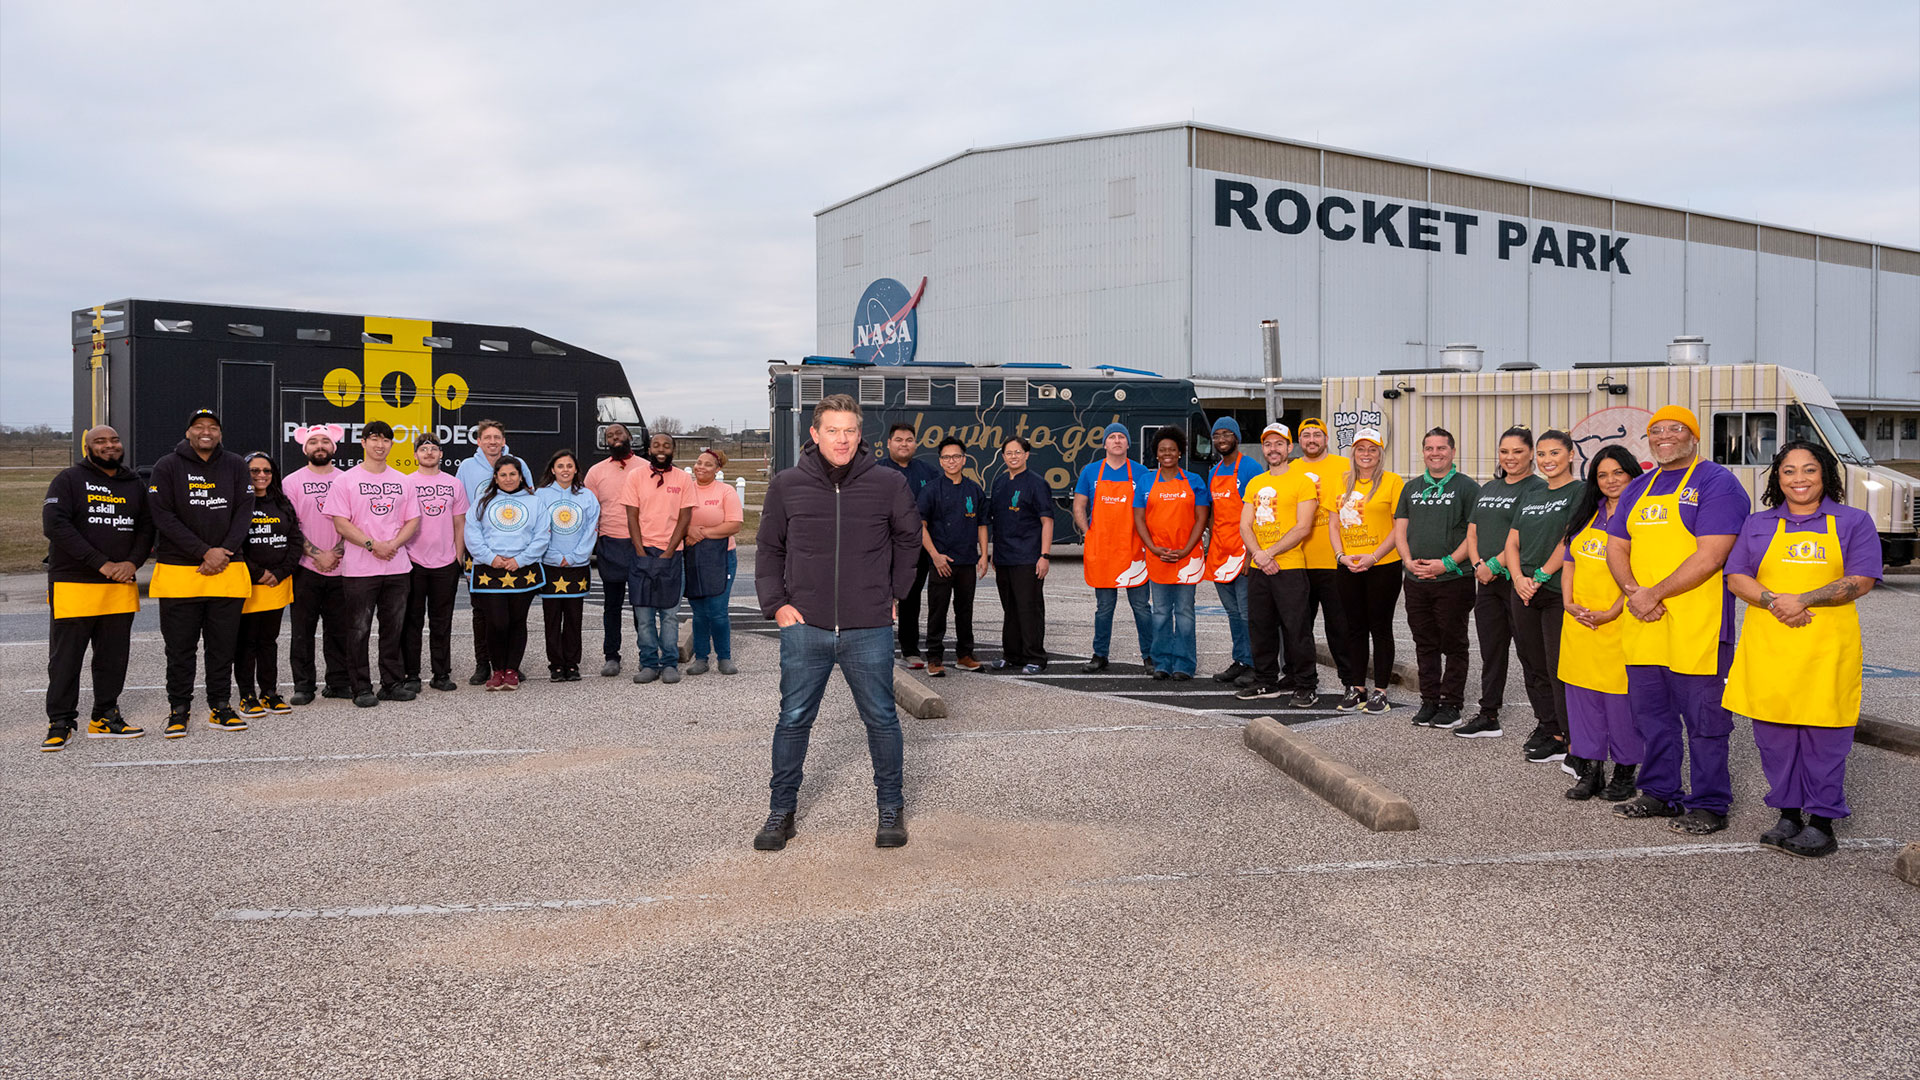  'Great Food Truck Race' blasts off on 17th season with stop at NASA 